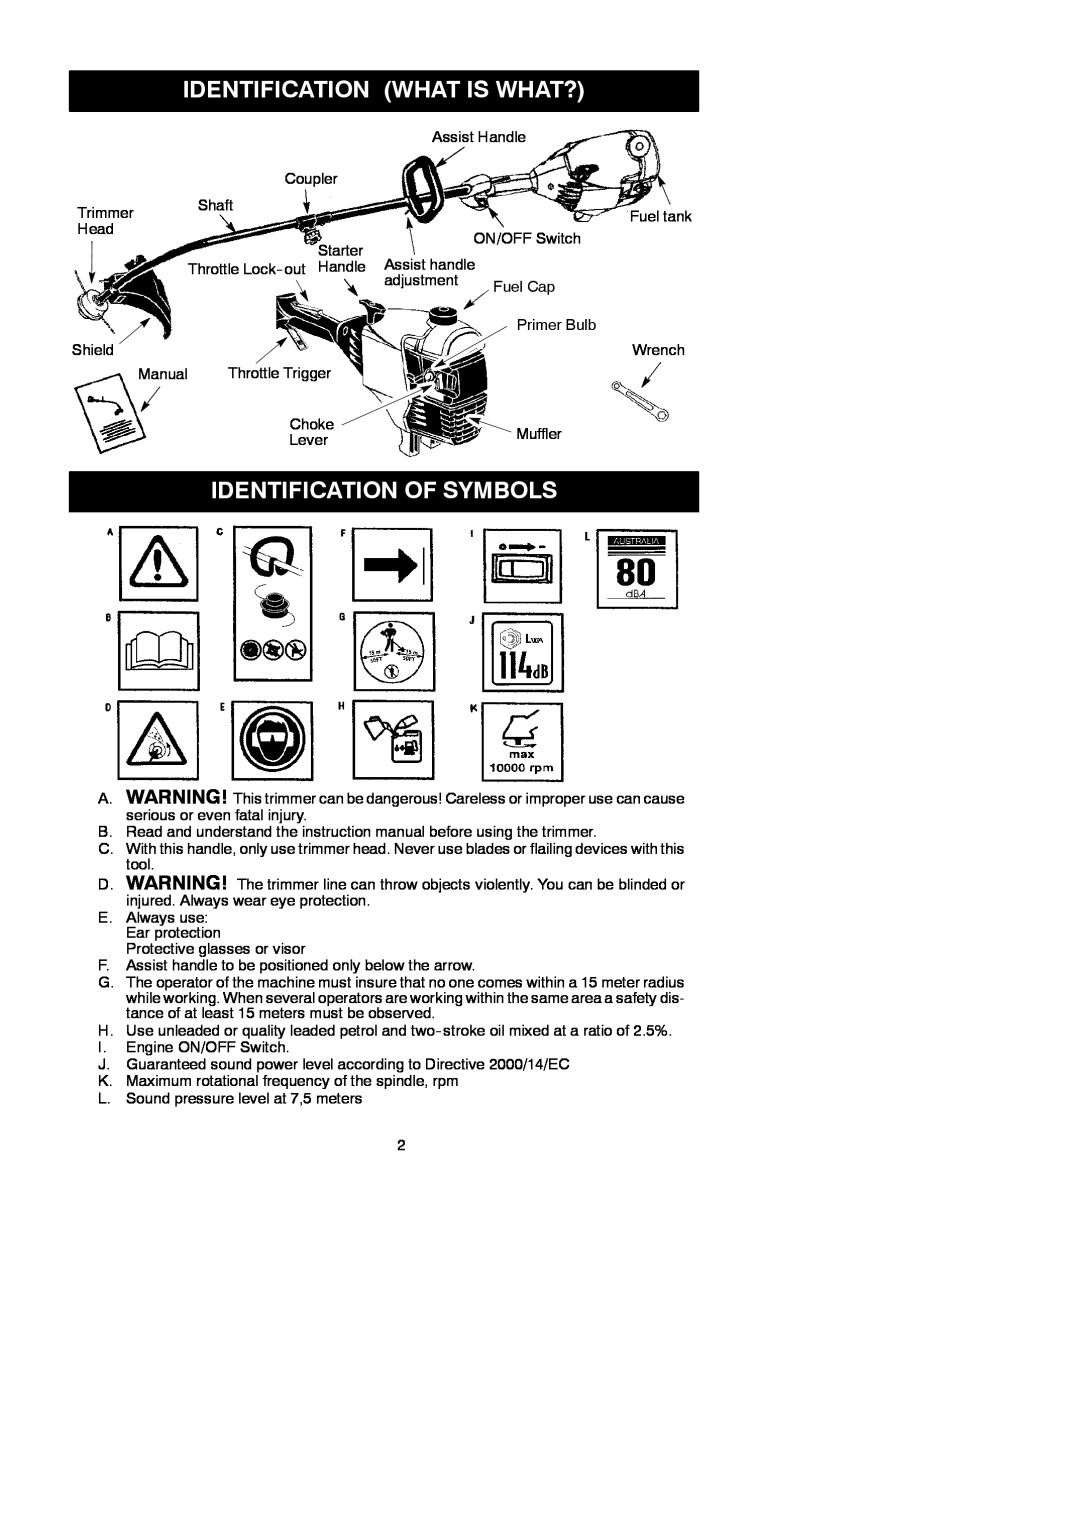 McCulloch 281 instruction manual Identification What Is What?, Identification Of Symbols 